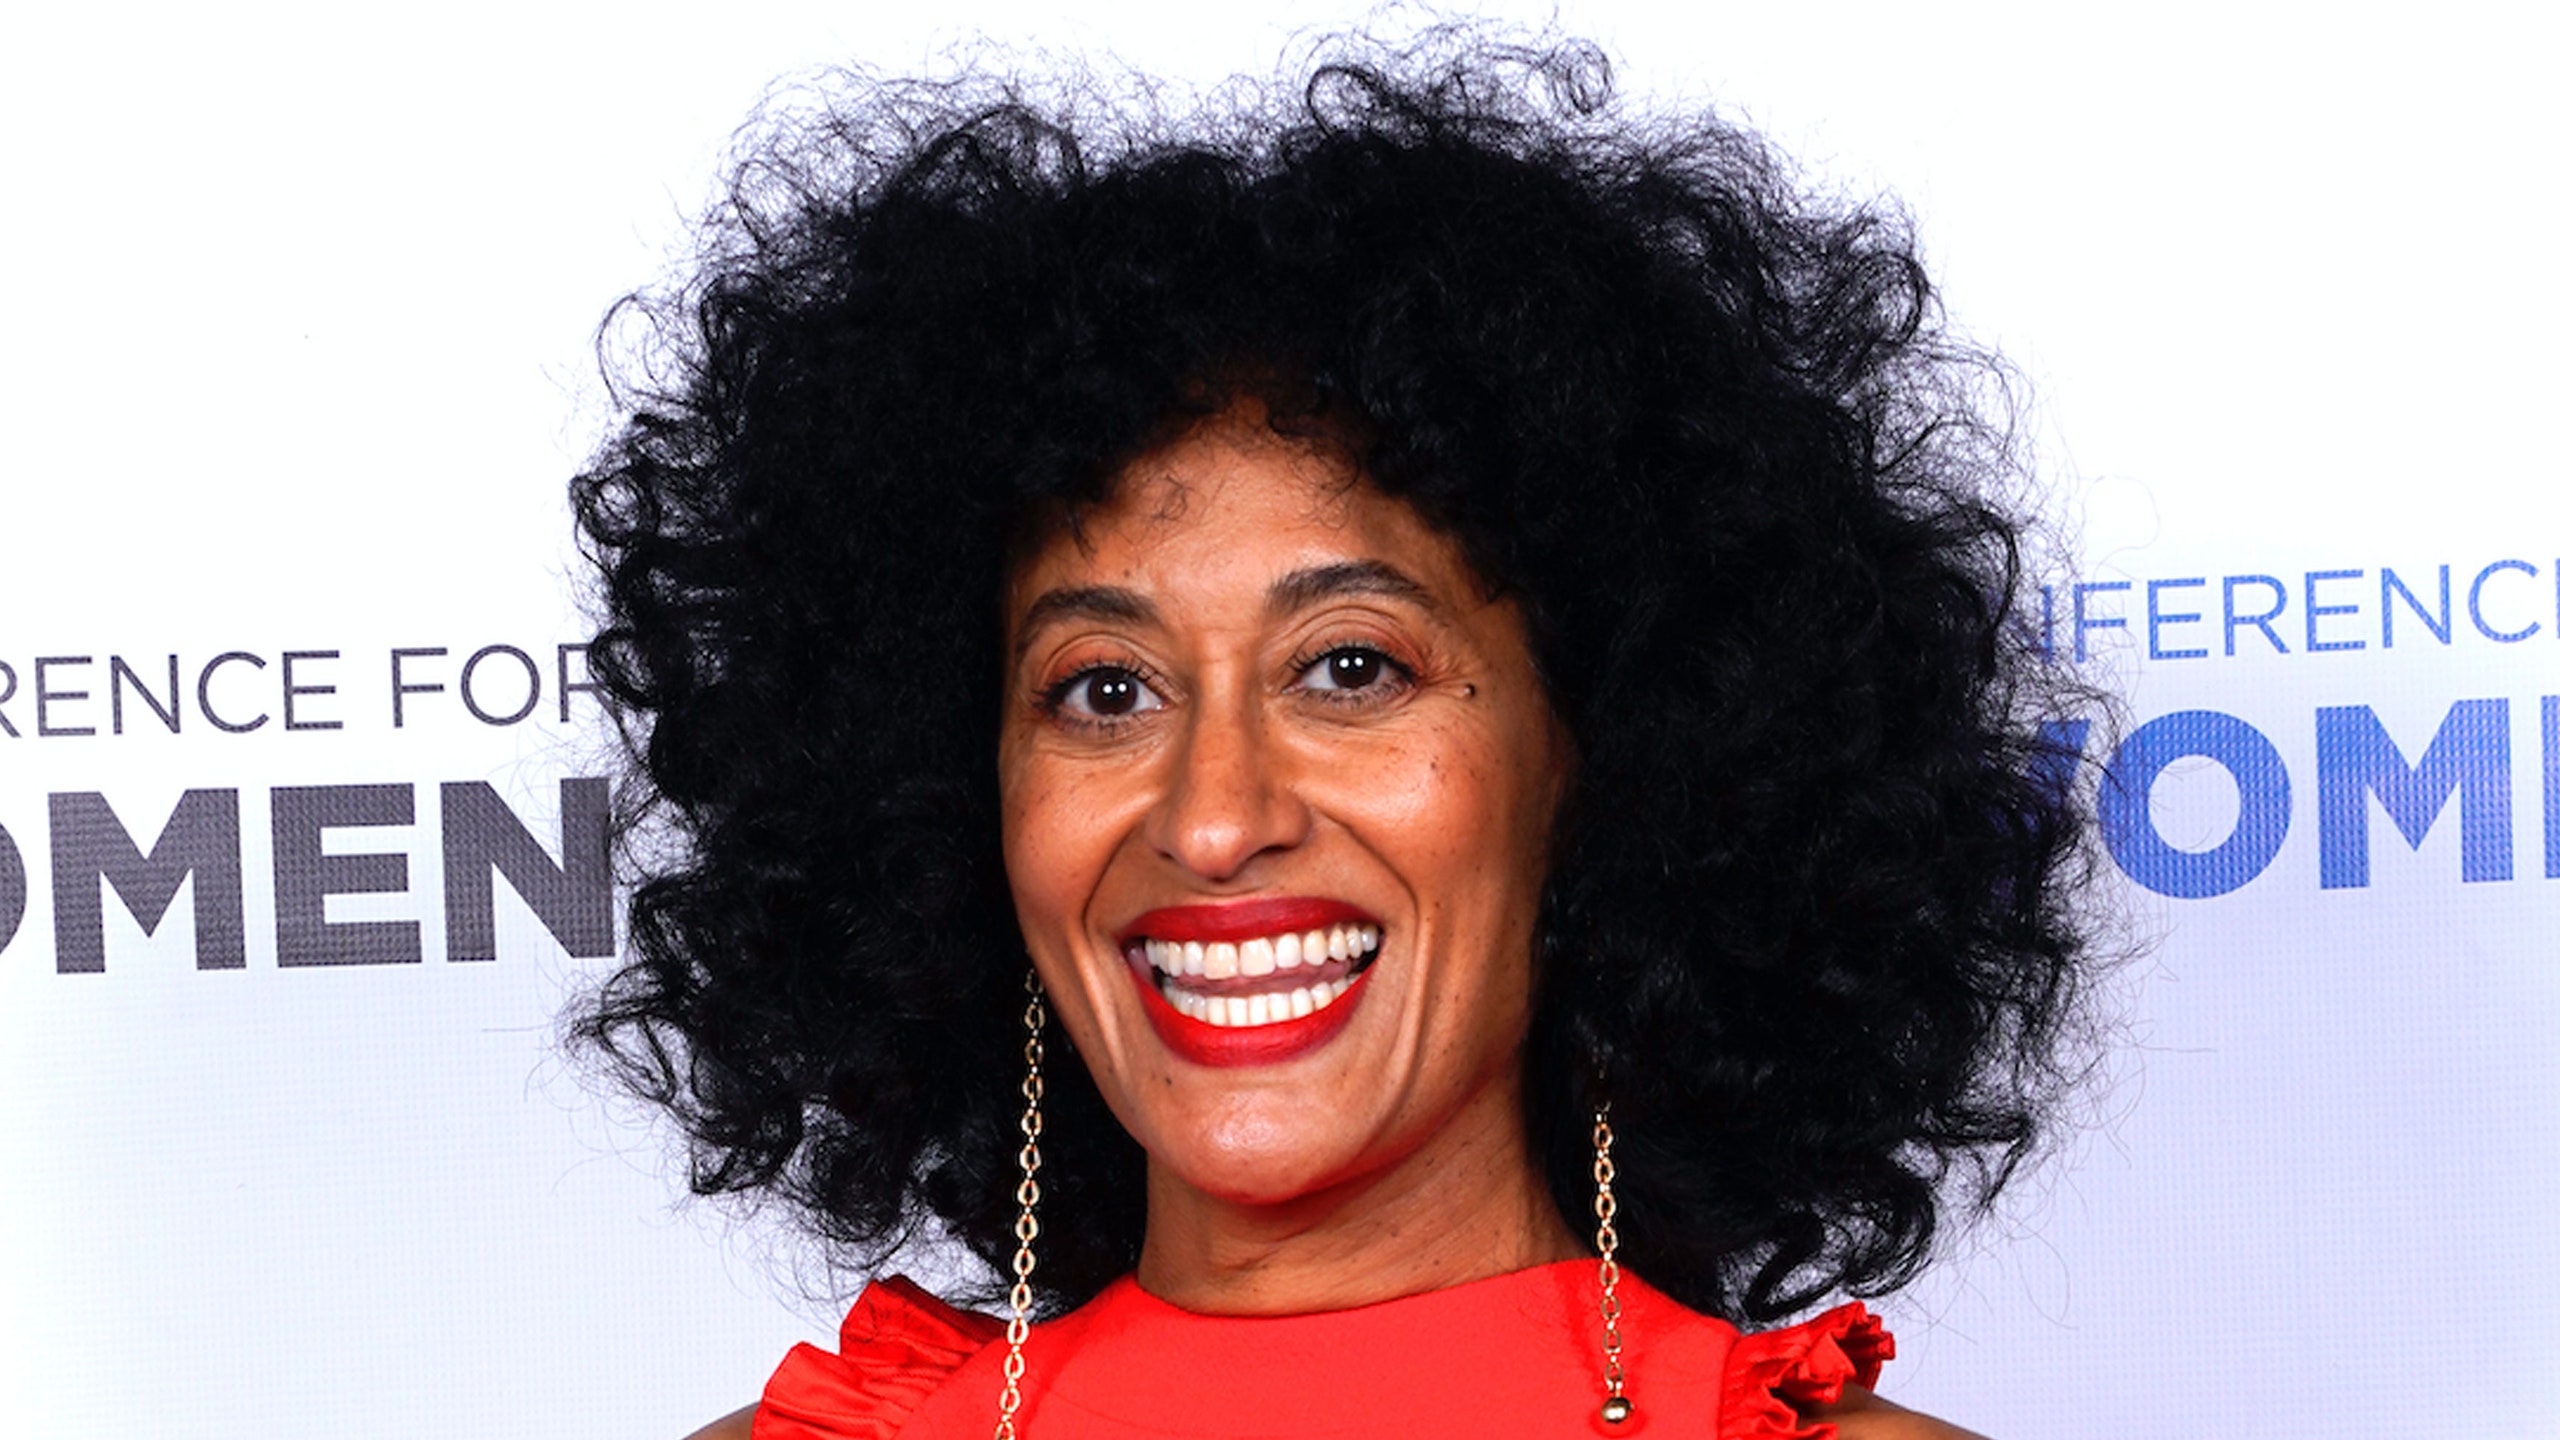 Tracee Ellis Ross Plastic Surgery – Before and After. Body Measurements, Botox, Facelift, and More!